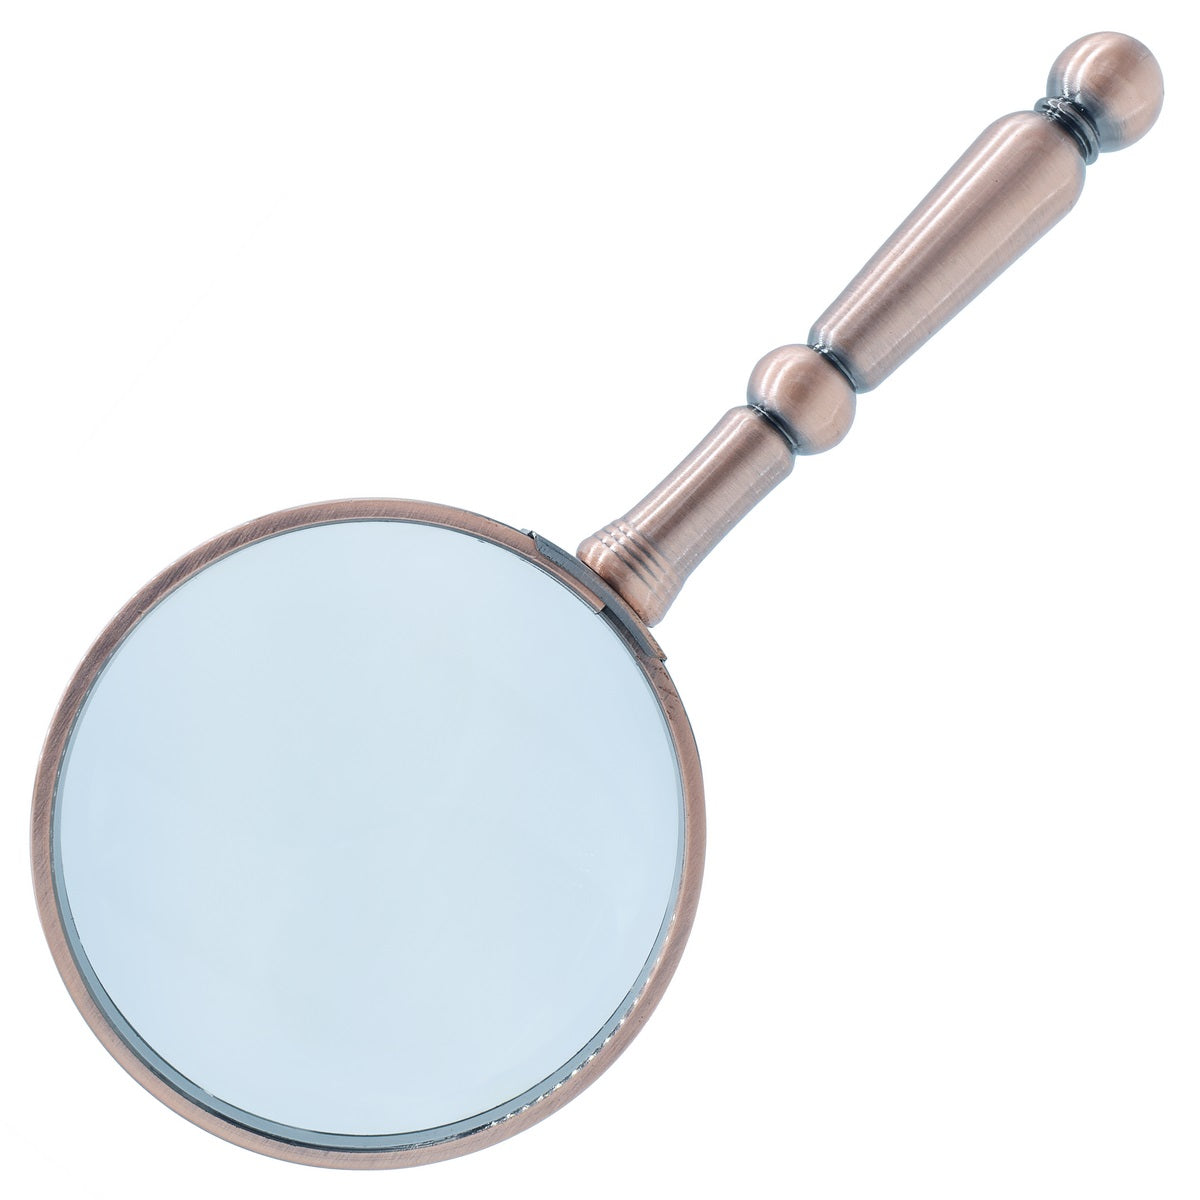 Copper 75mm Magnifying Glass - For Office Use, Students, Professionals, Personal Use, Corporate Gifting, Return Gift